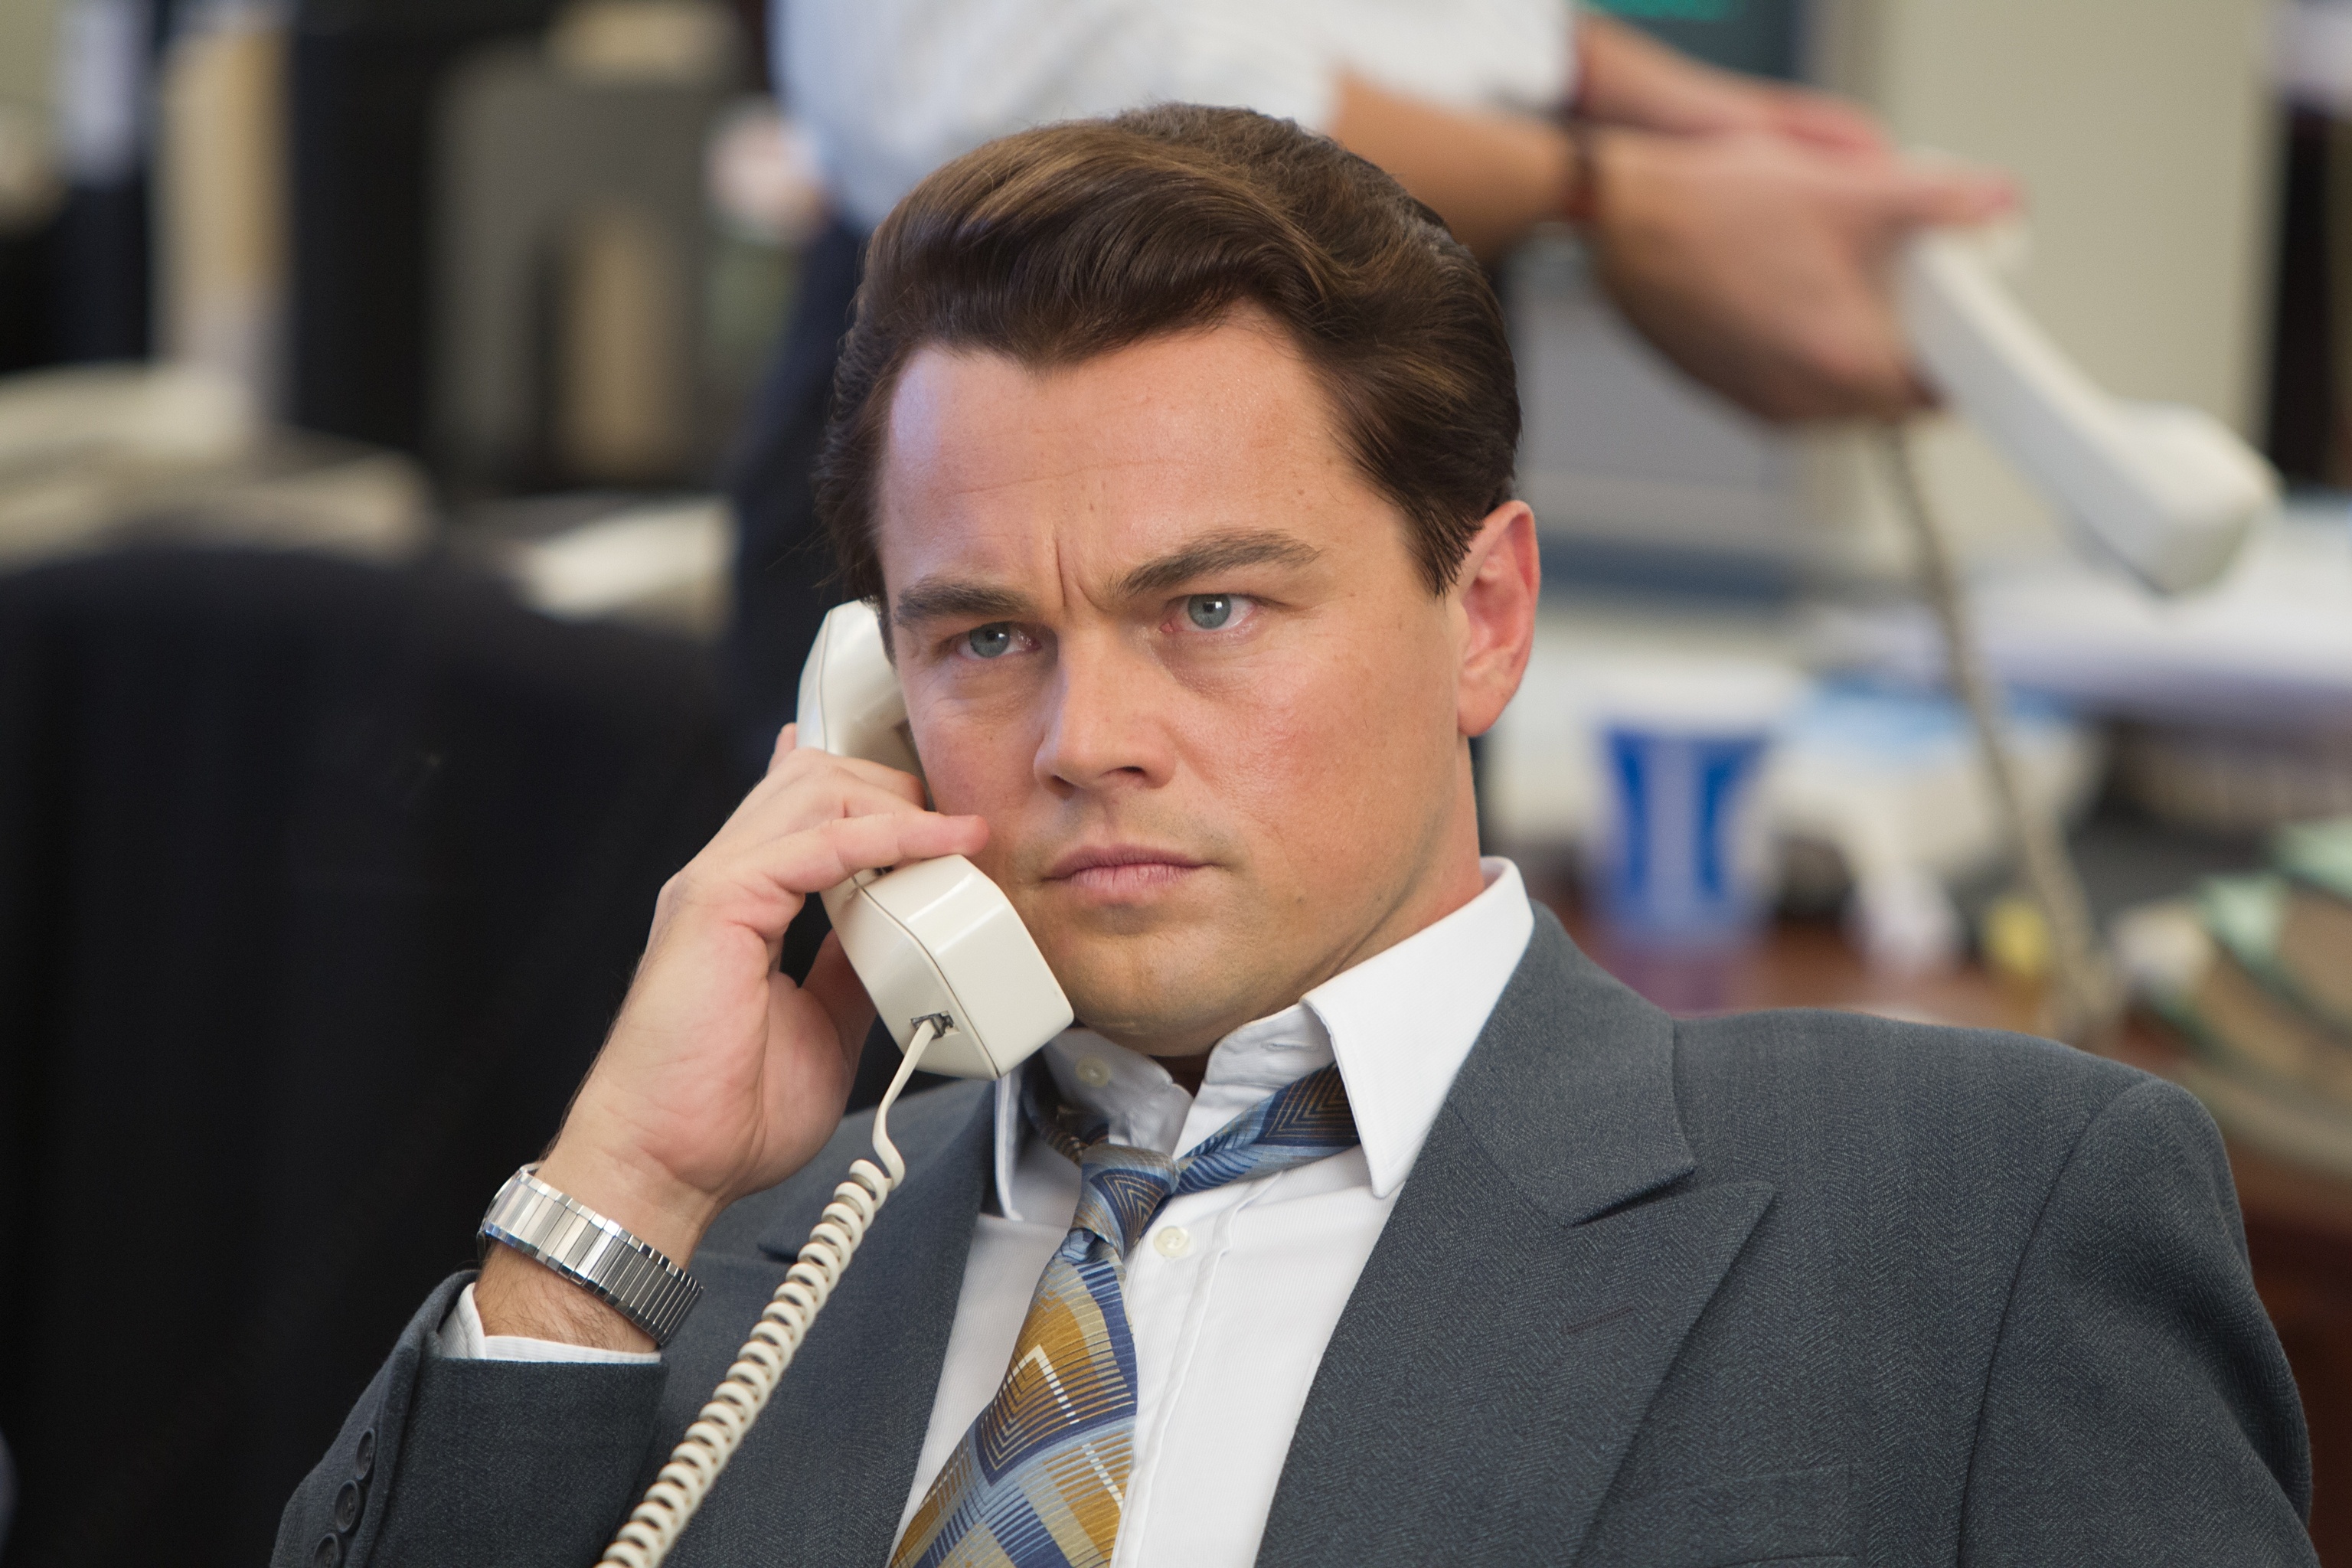 The Wolf of Wall Street: Jordan Belfort, A former Wall Street trader who was guilty of crimes related to stock market manipulation. 3080x2050 HD Wallpaper.